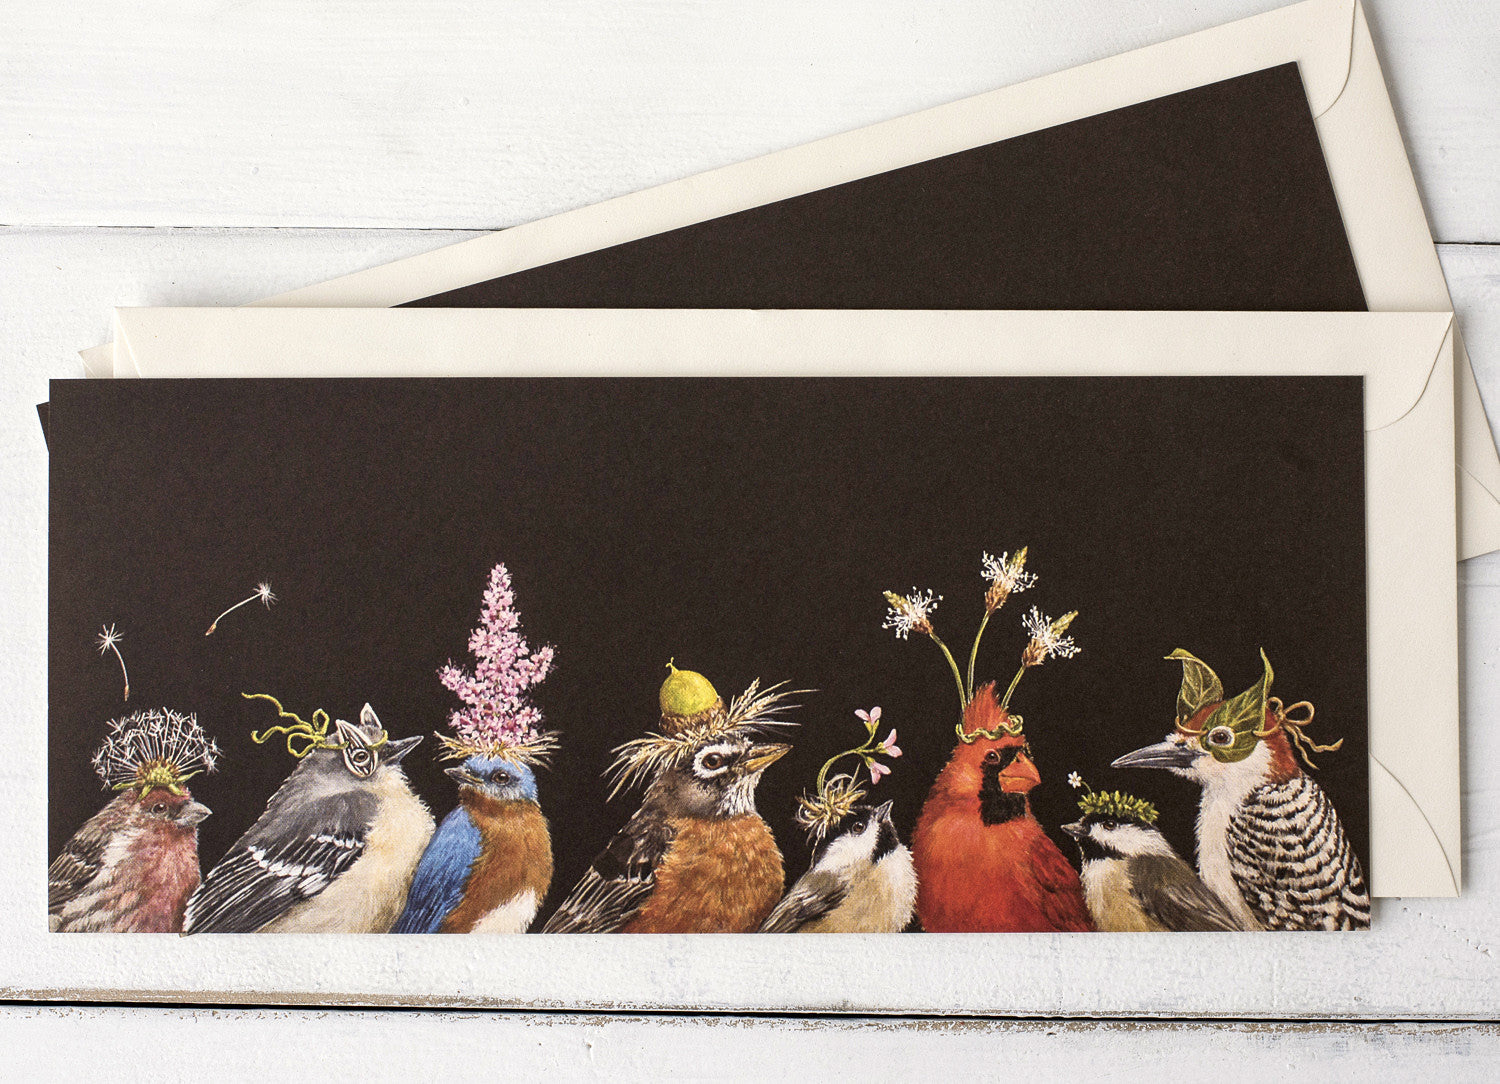 A row of colorful birds with leaves on their heads, featuring Hester &amp; Cook&